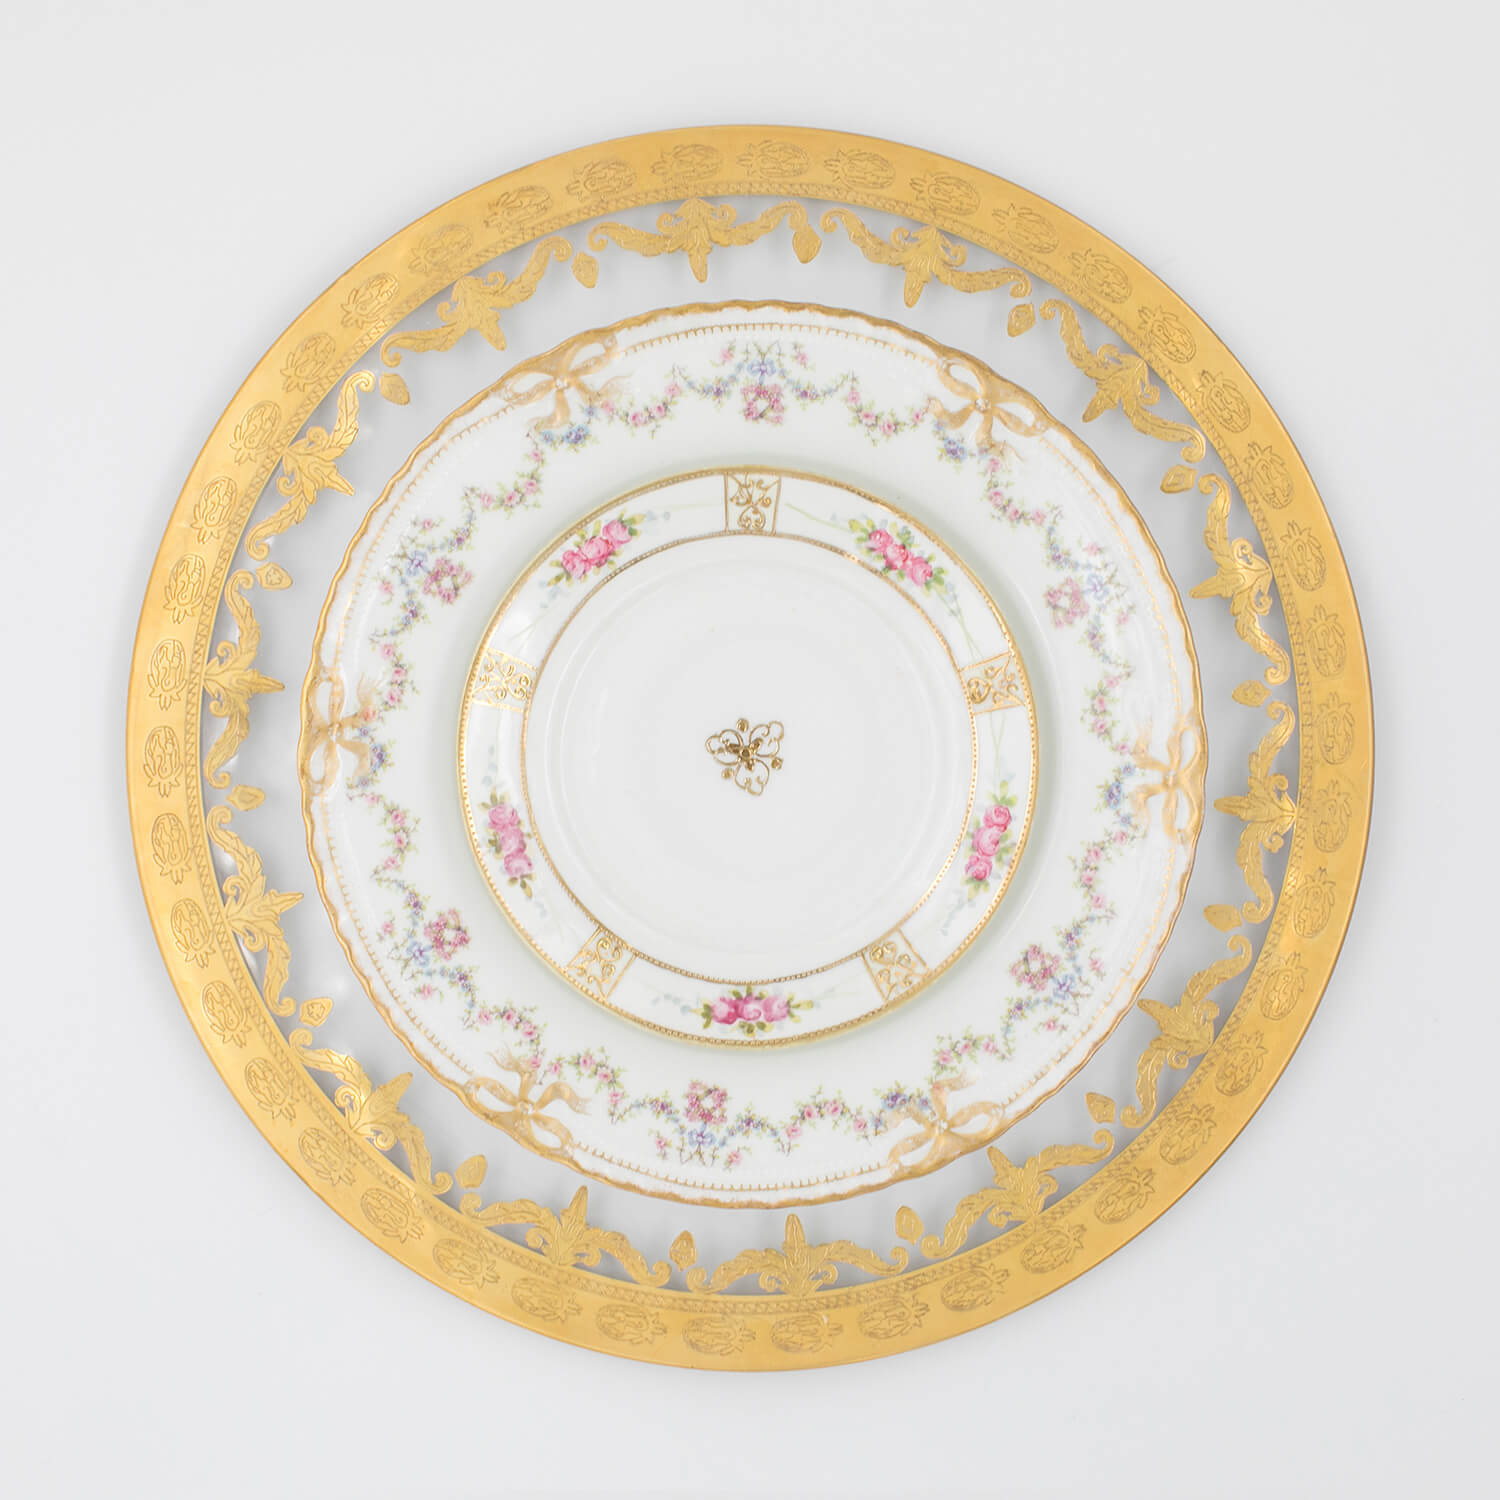 The Limoges Collection